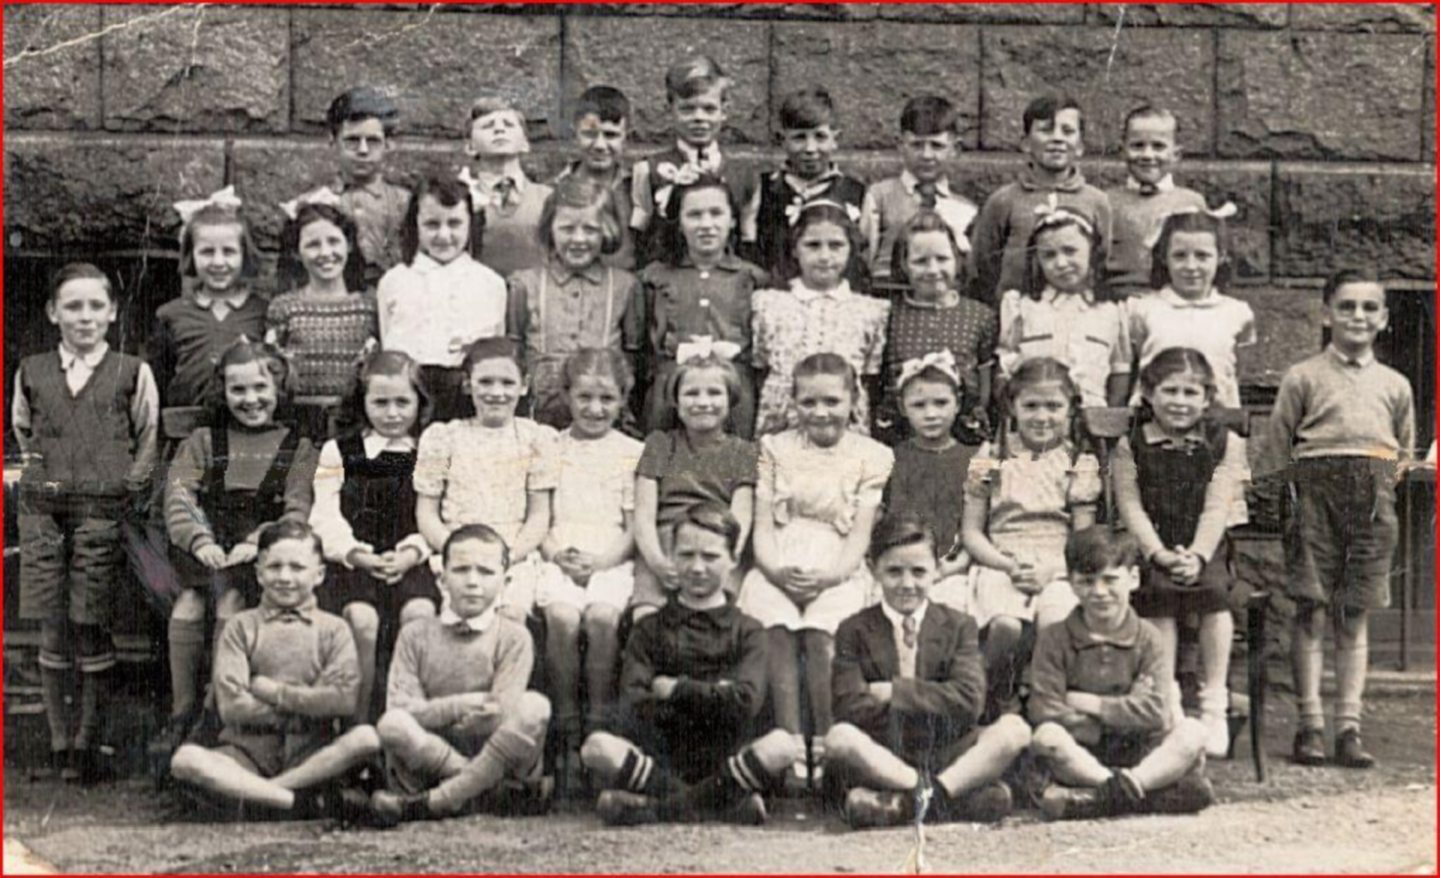 Miss Clark's class at Walker Road School, Aberdeen, pose for a photo in 1948-49